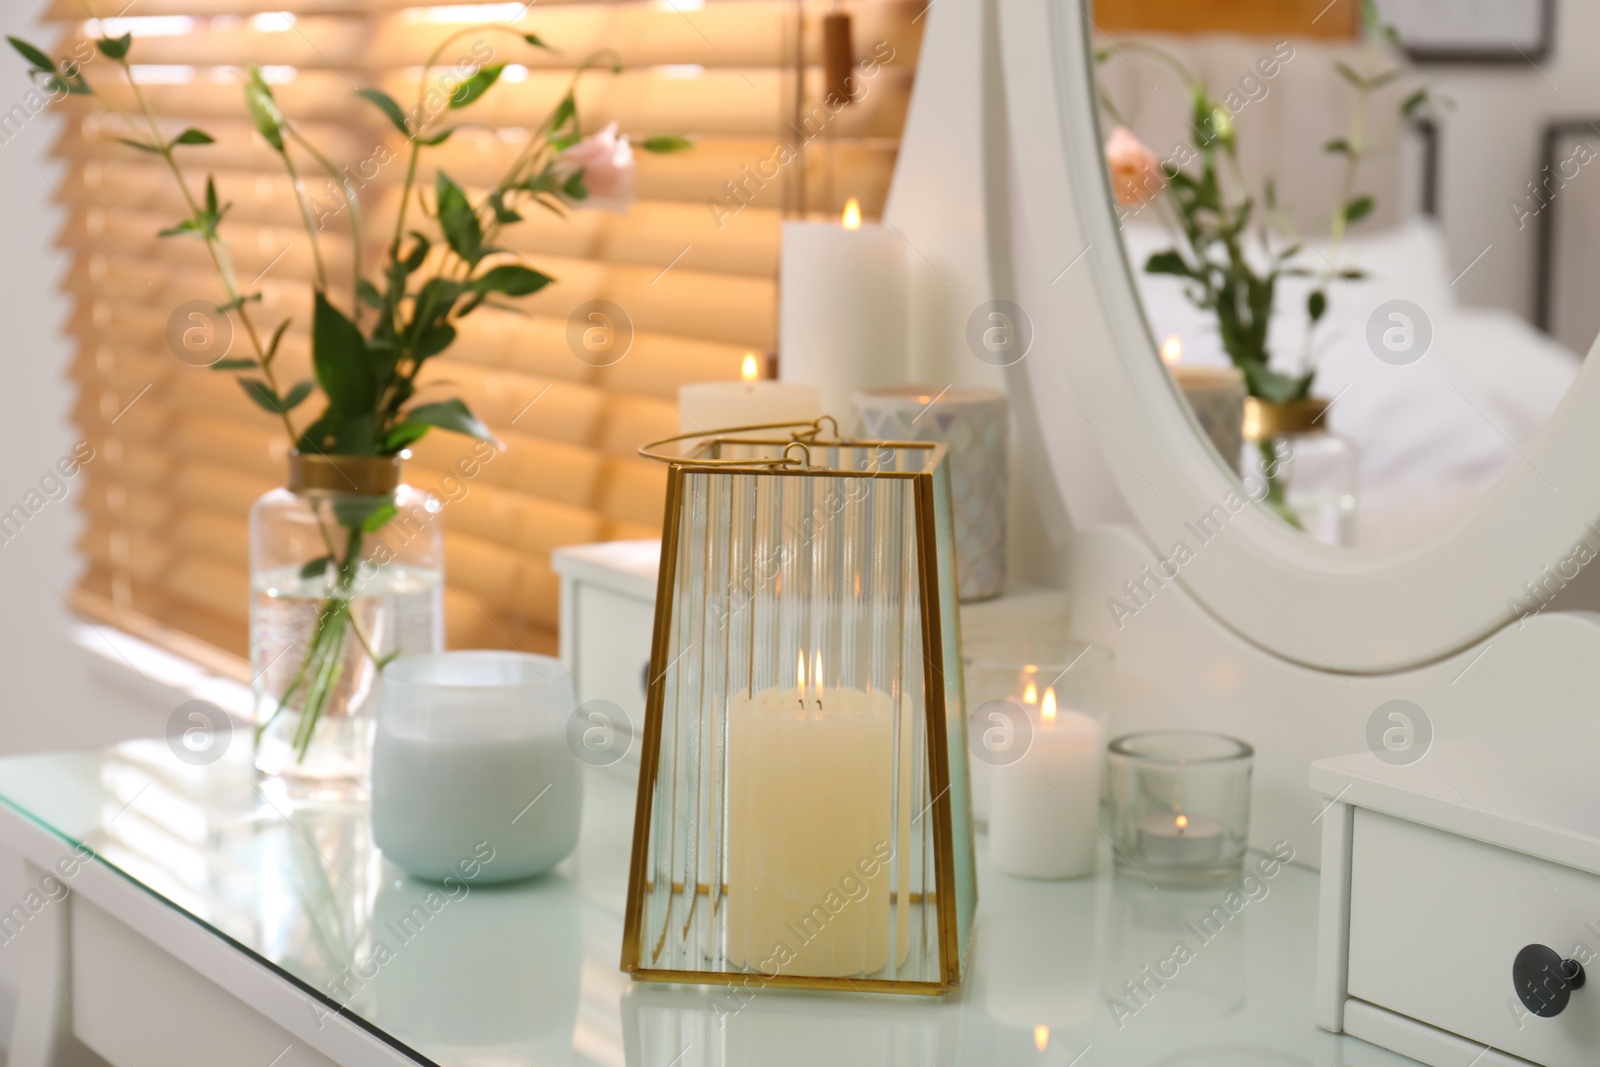 Photo of Burning scented candles and bouquet on dressing table indoors